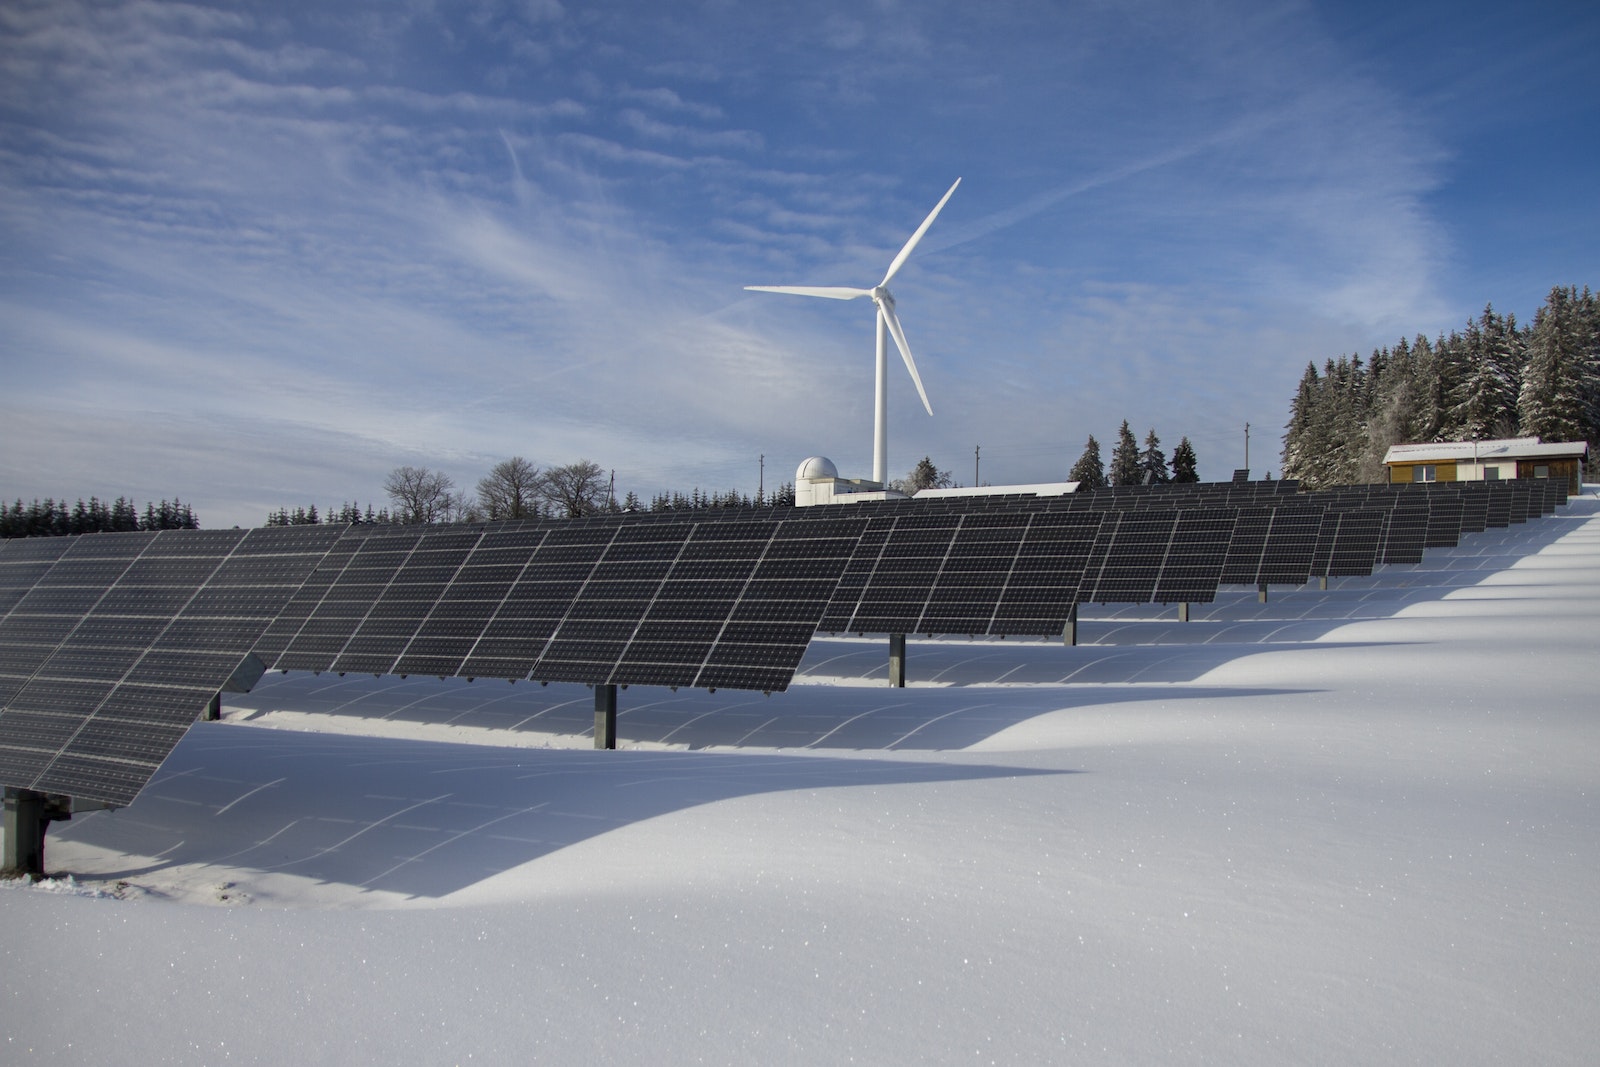 Solar Panels on Snow With Windmill Under Clear Day Sky